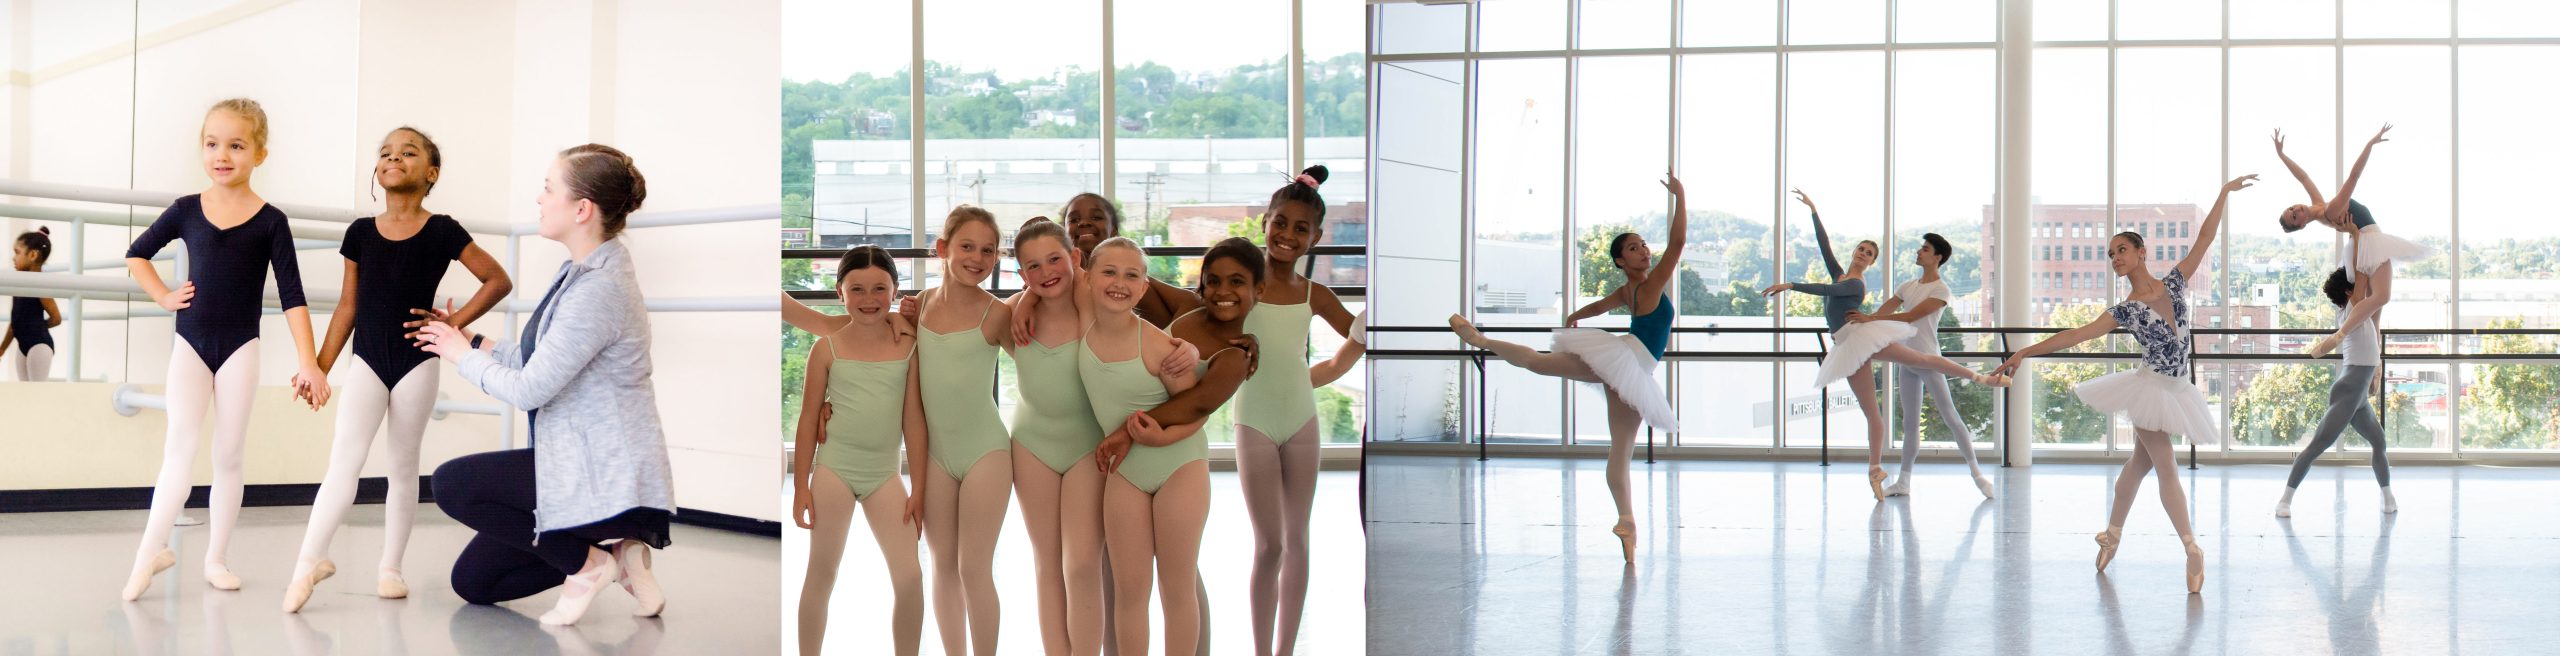 Master Classes - Pittsburgh Ballet Theatre